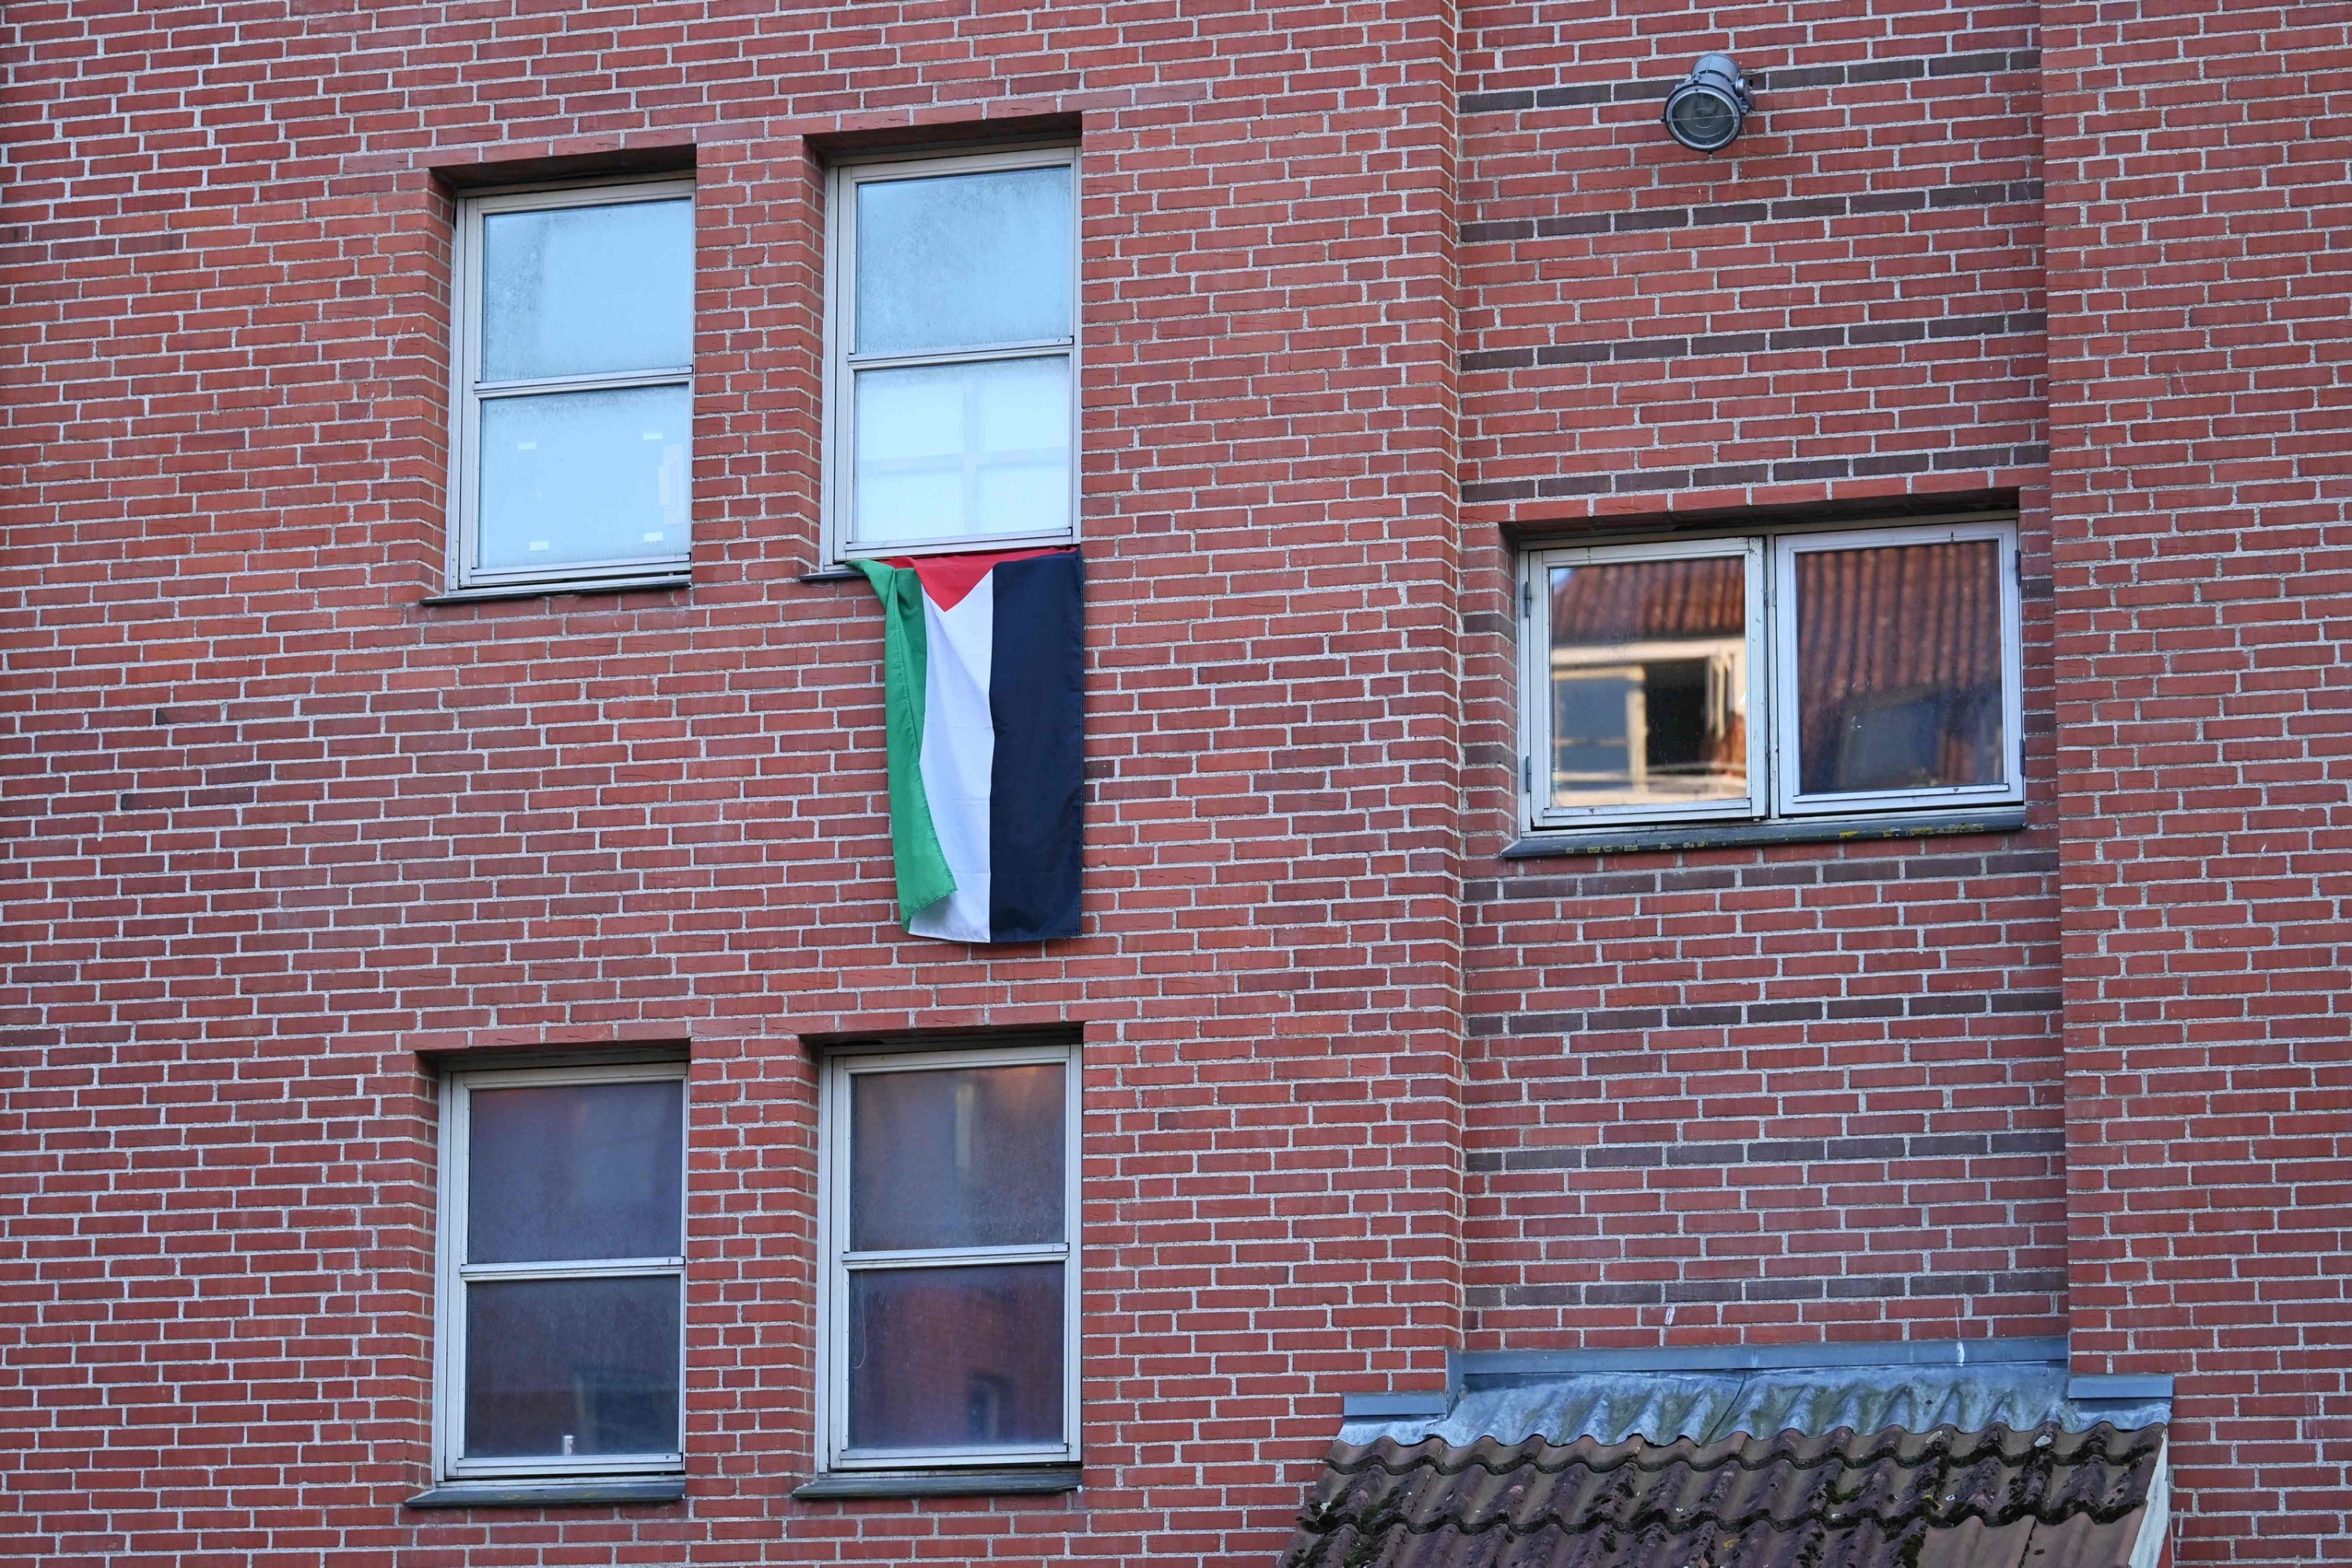 A Palestinian flag is seen hanging out of a window in the courtyard of Mjolnerparken housing estate in Copenhagen, Denmark, Aug. 28, 2023. (AFP Photo)